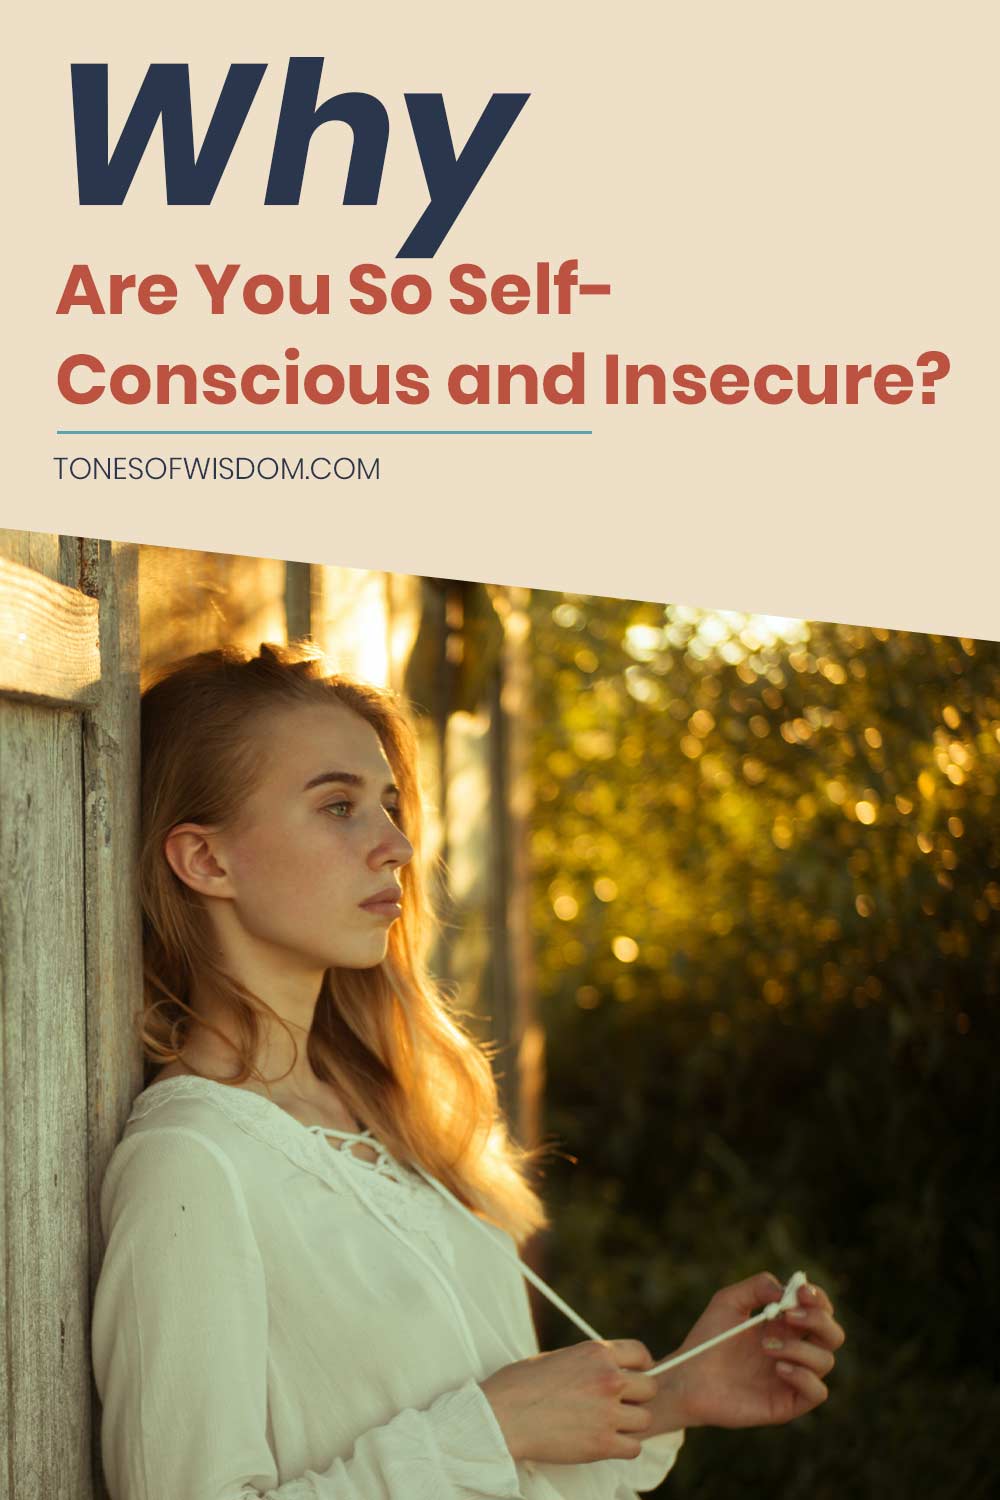 Why Are You So Self-Conscious and Insecure?